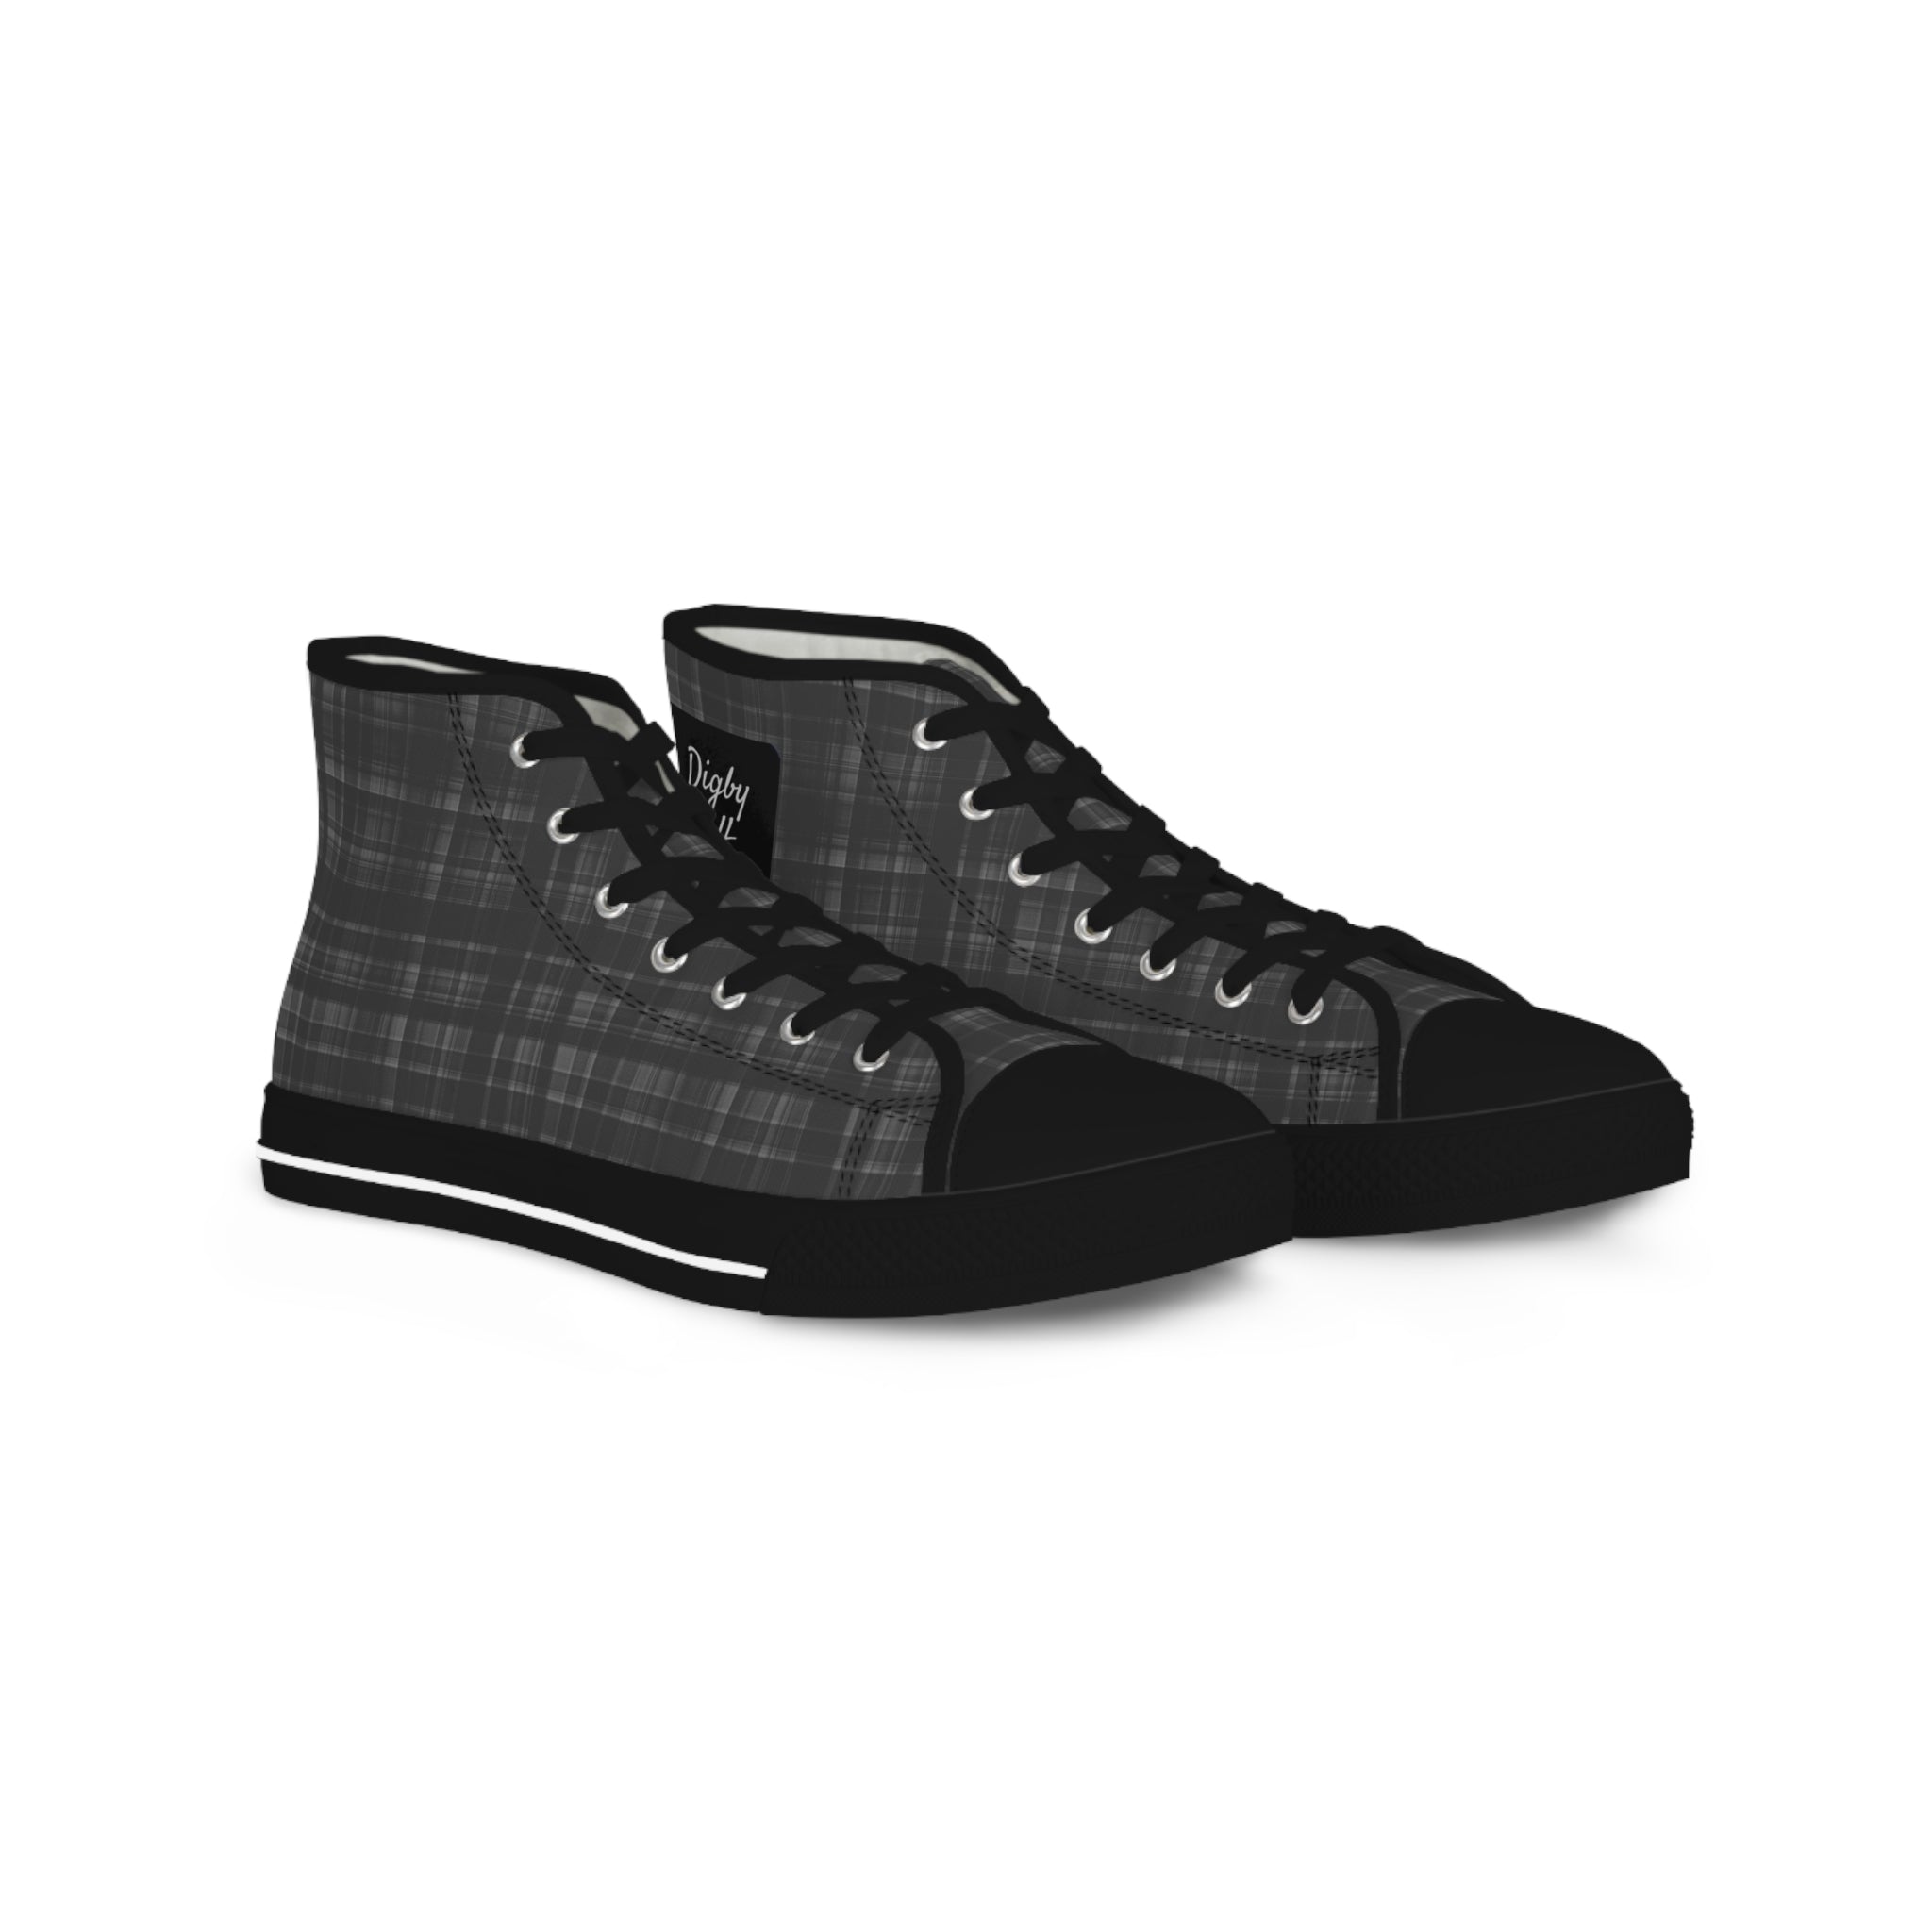 Two Digby Golf sneakers side by side featuring black and grey plaid pattern with black accents